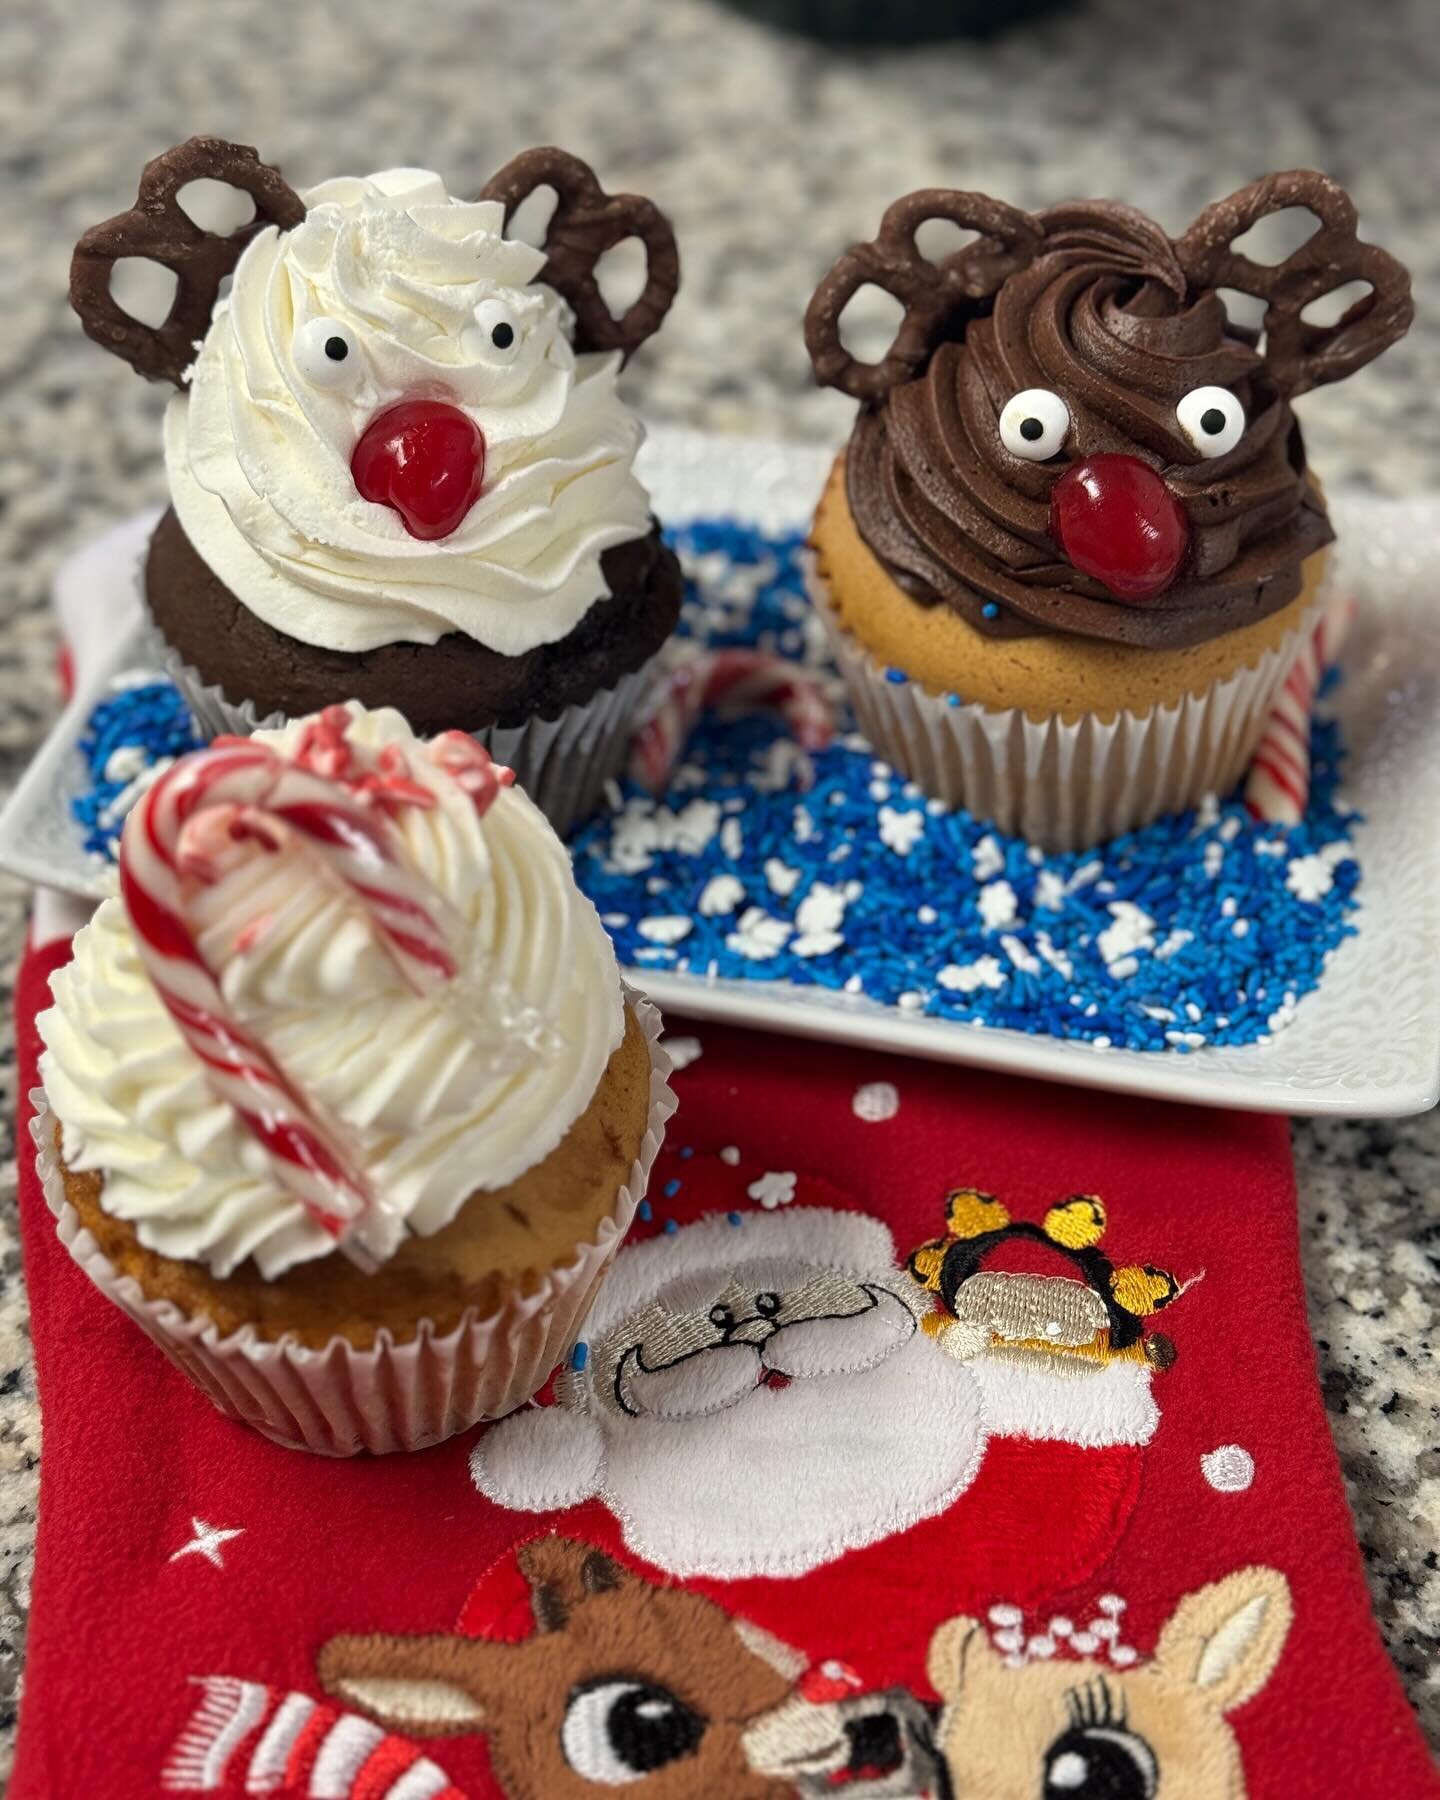 #raindeers #cupcakes and #peppermint candy cupcakes. Now available!